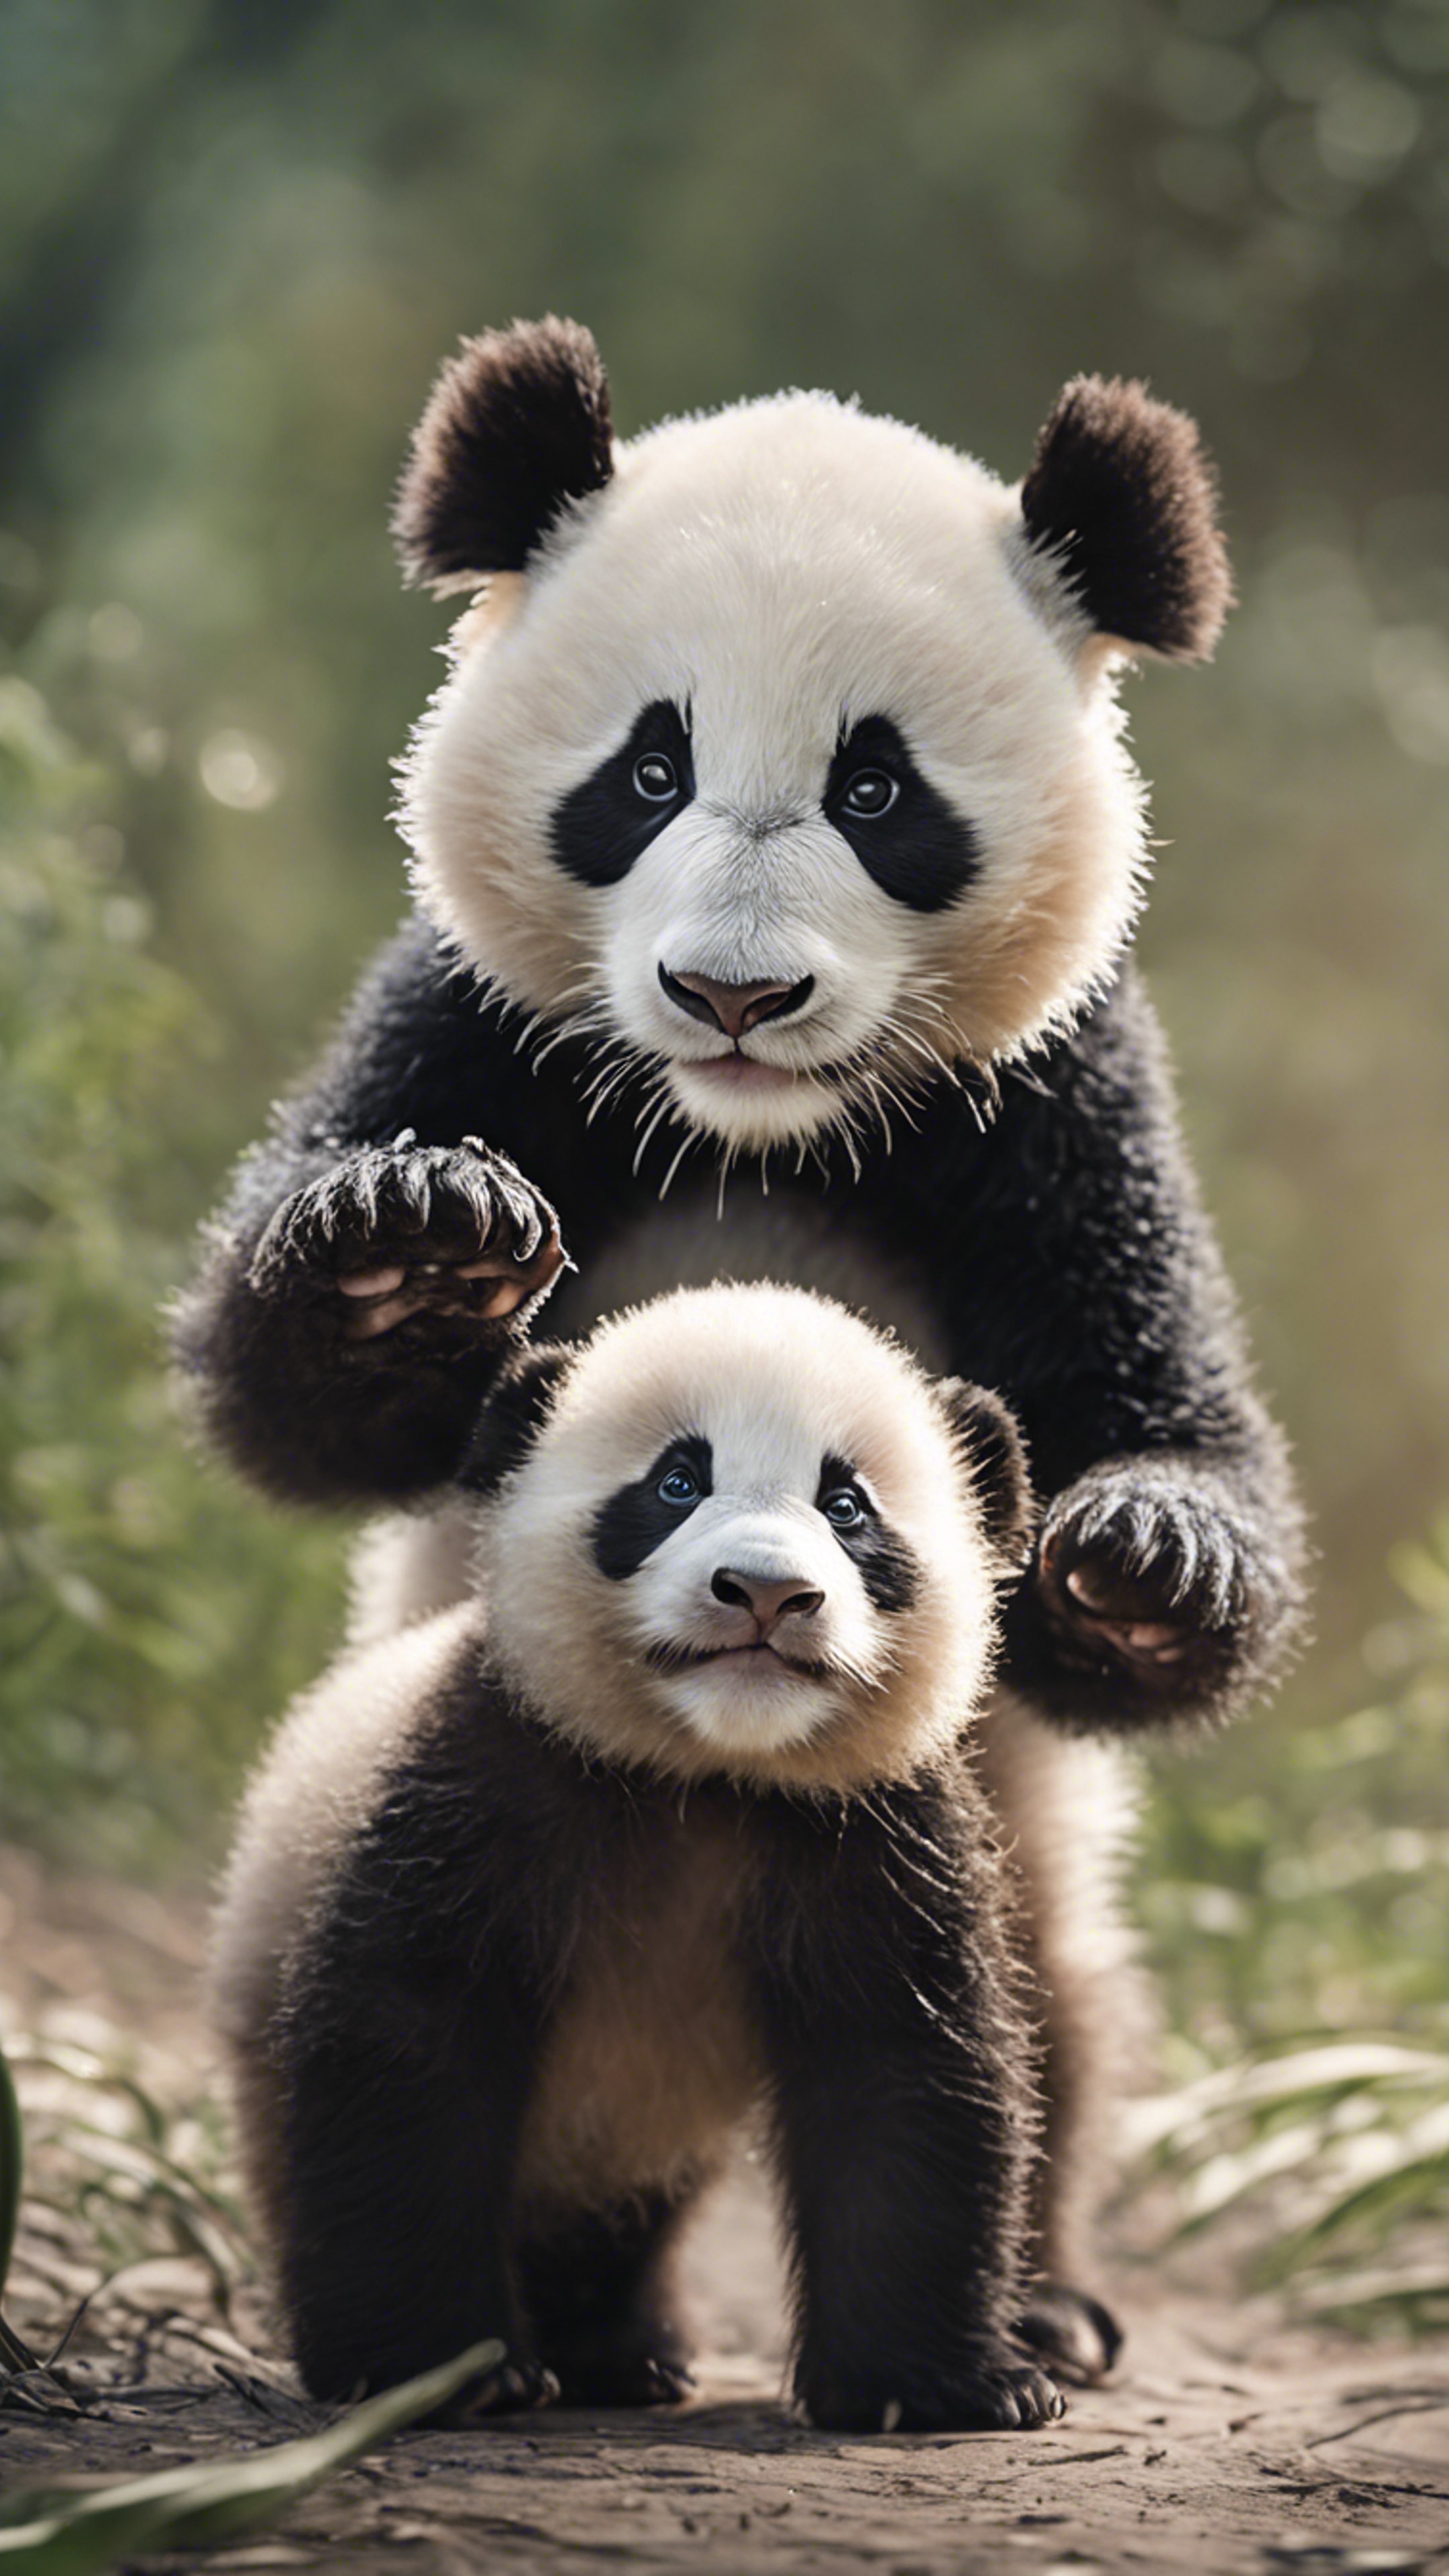 A newborn panda cub learning to walk, under the loving guidance of its mother. Tapetai[d326db7fc4d14111aedf]